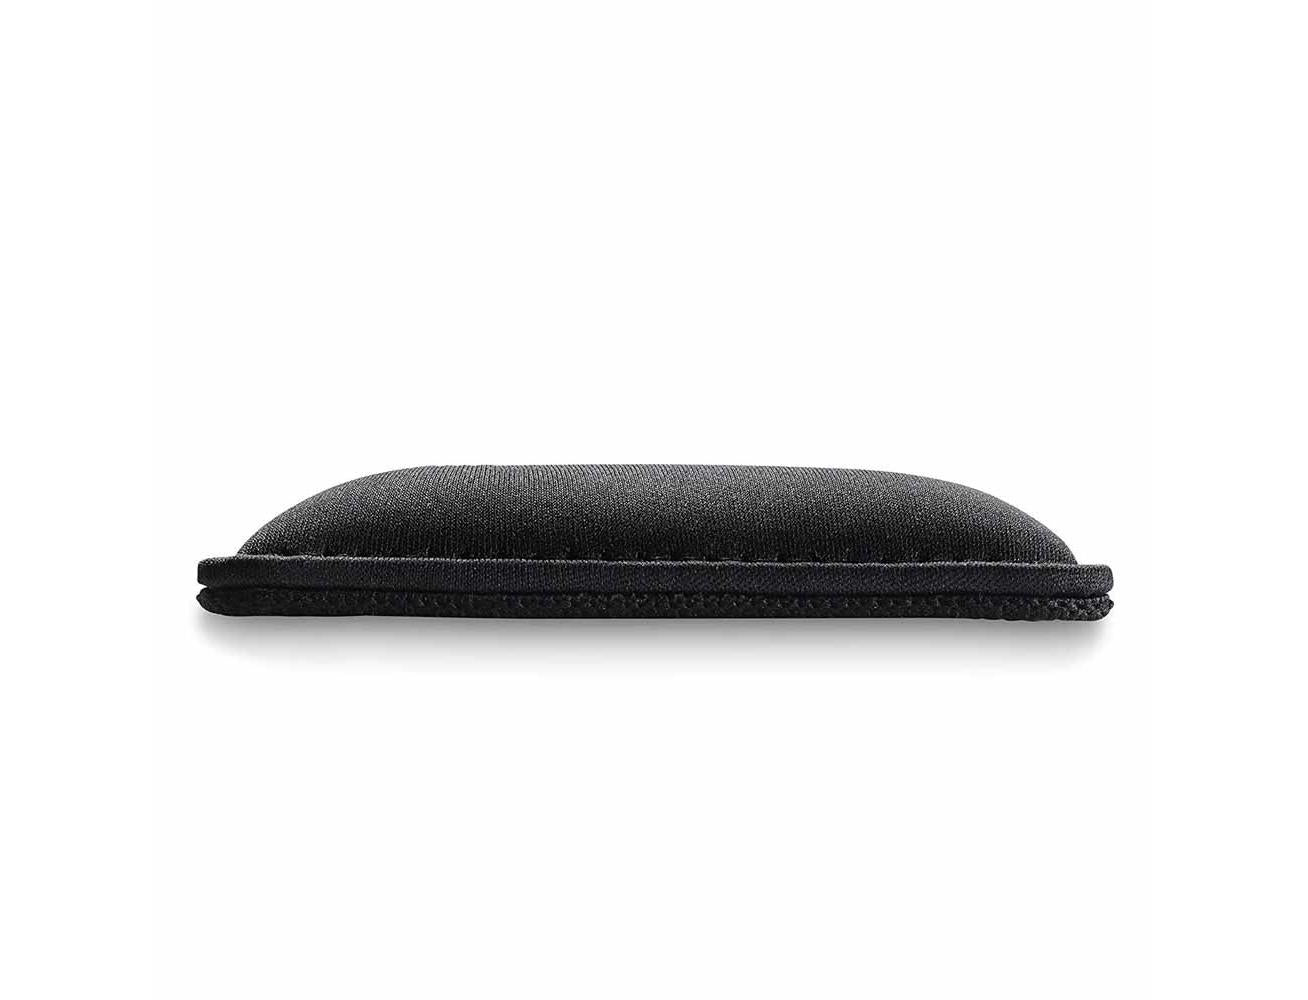 Glorious Gaming Mouse Wrist Pad/Rest  8x4 inches - Black